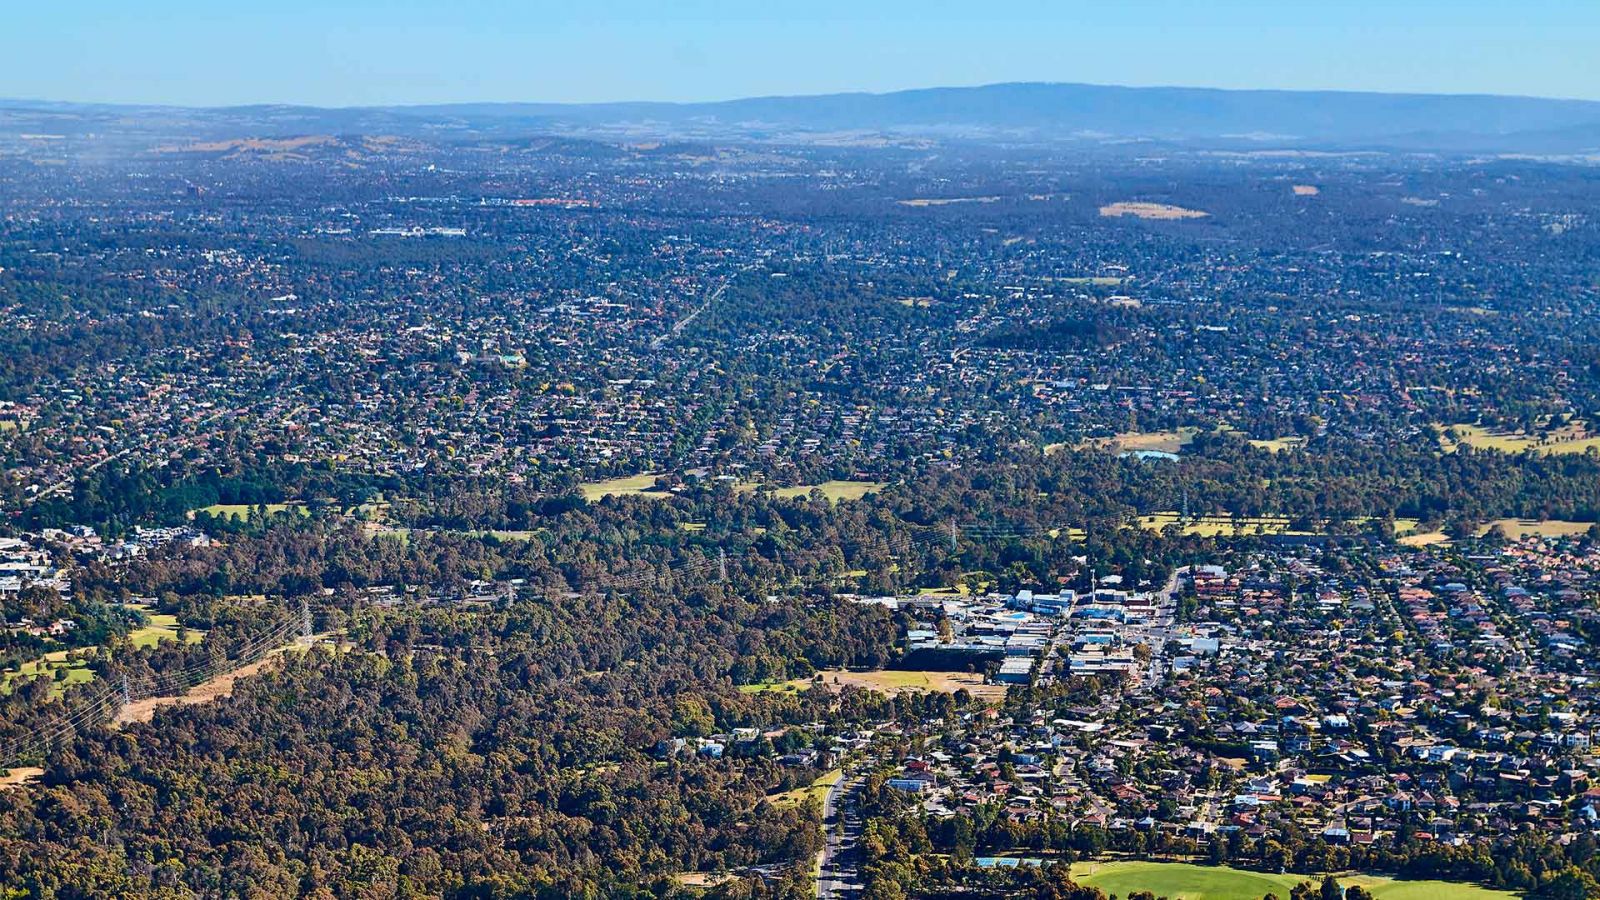 Aerial view of Bulleen Road surrounded by buildings, trees and open space.